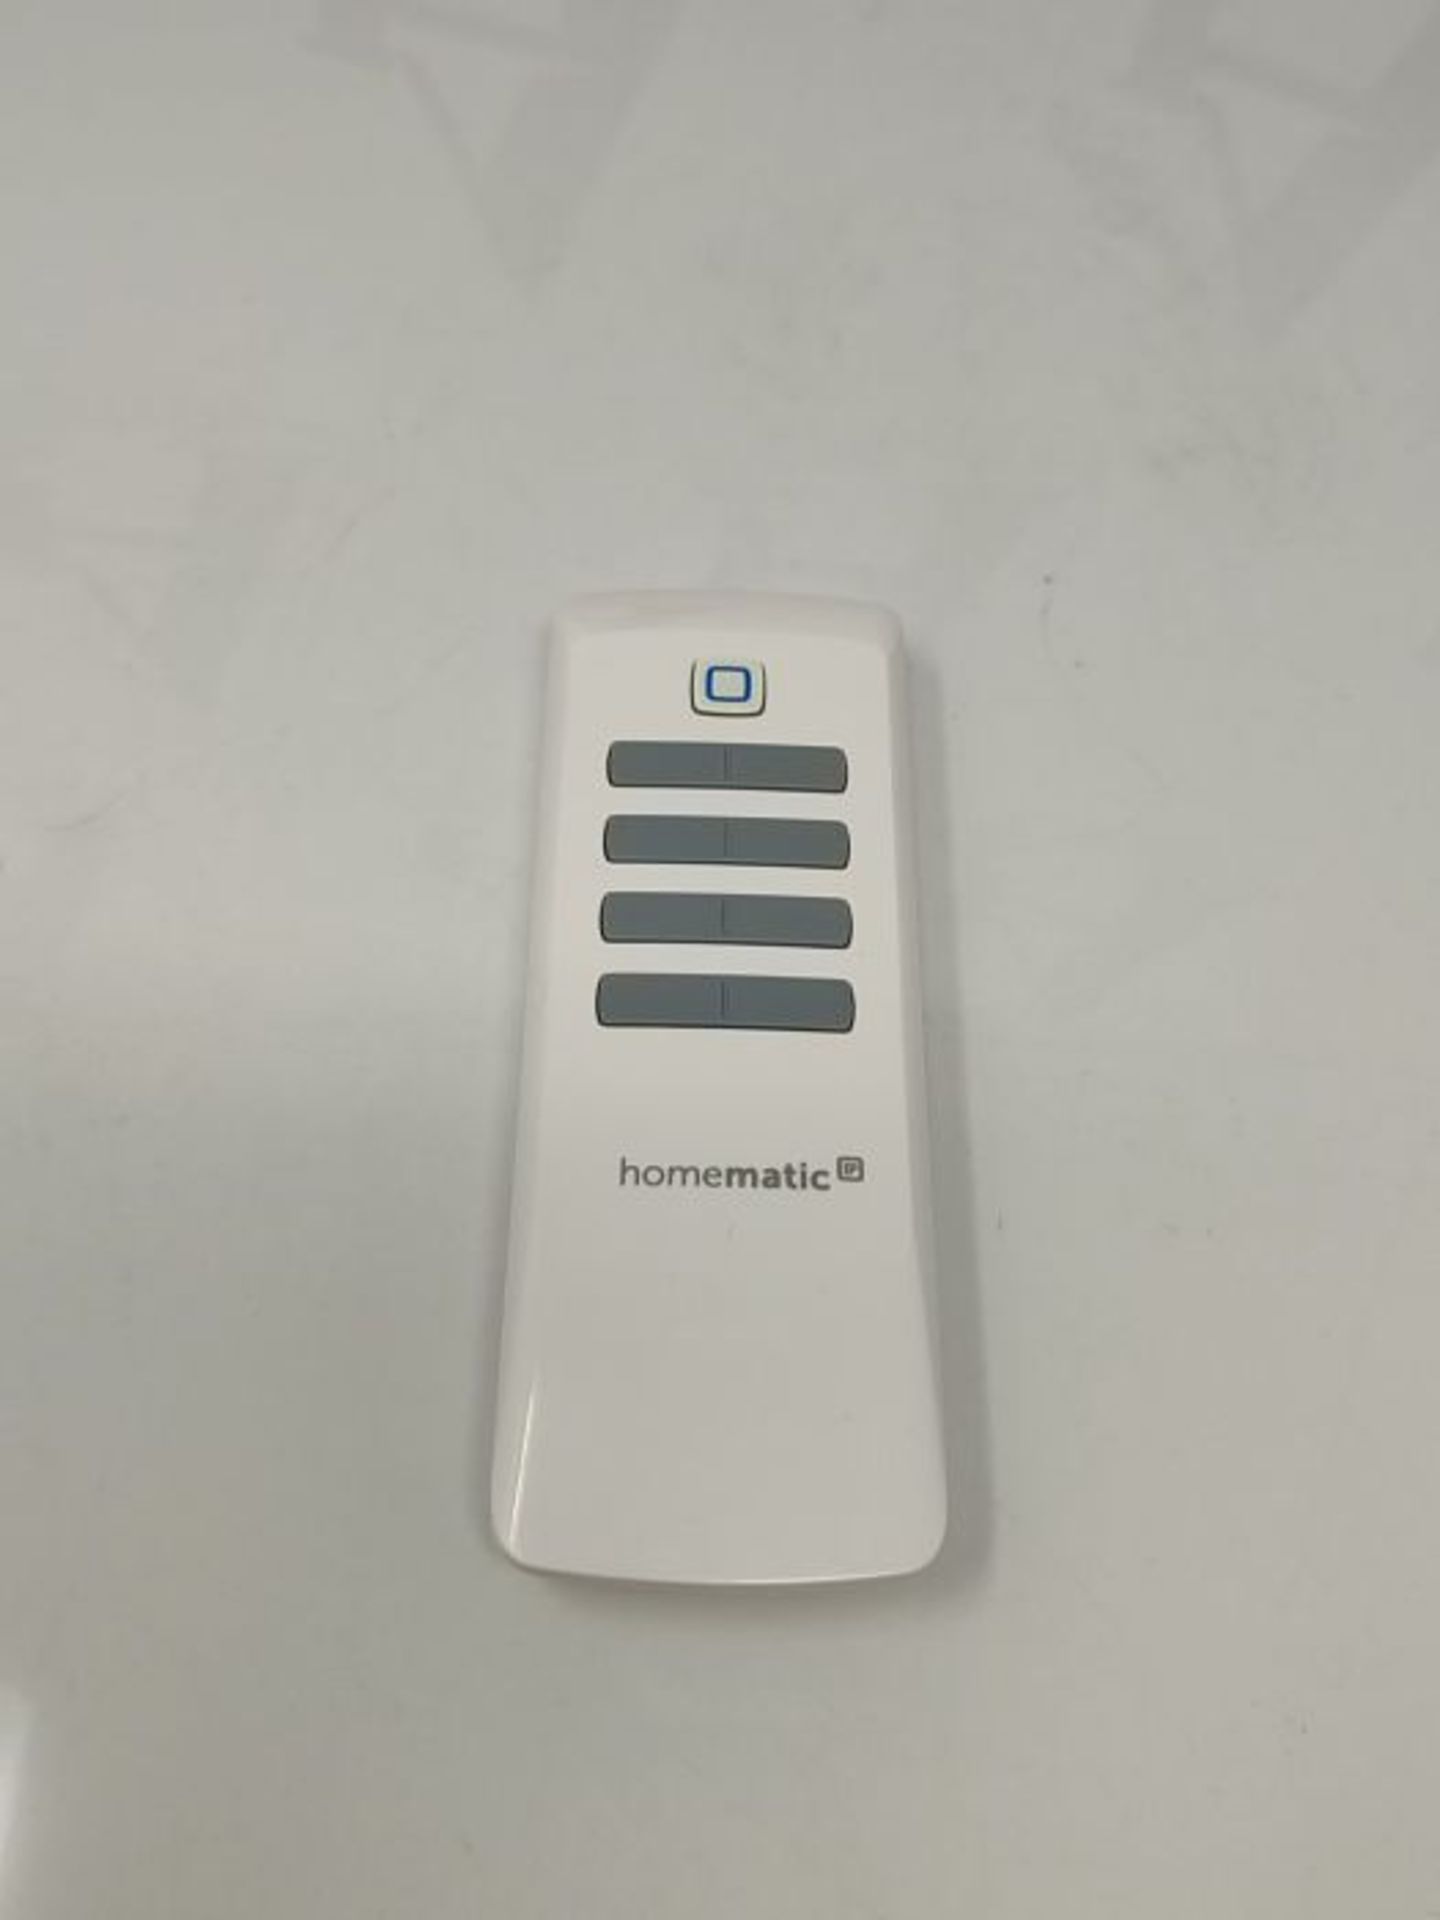 Homematic IP 142307A0 8 Buttons Remote Control - White - Image 3 of 3